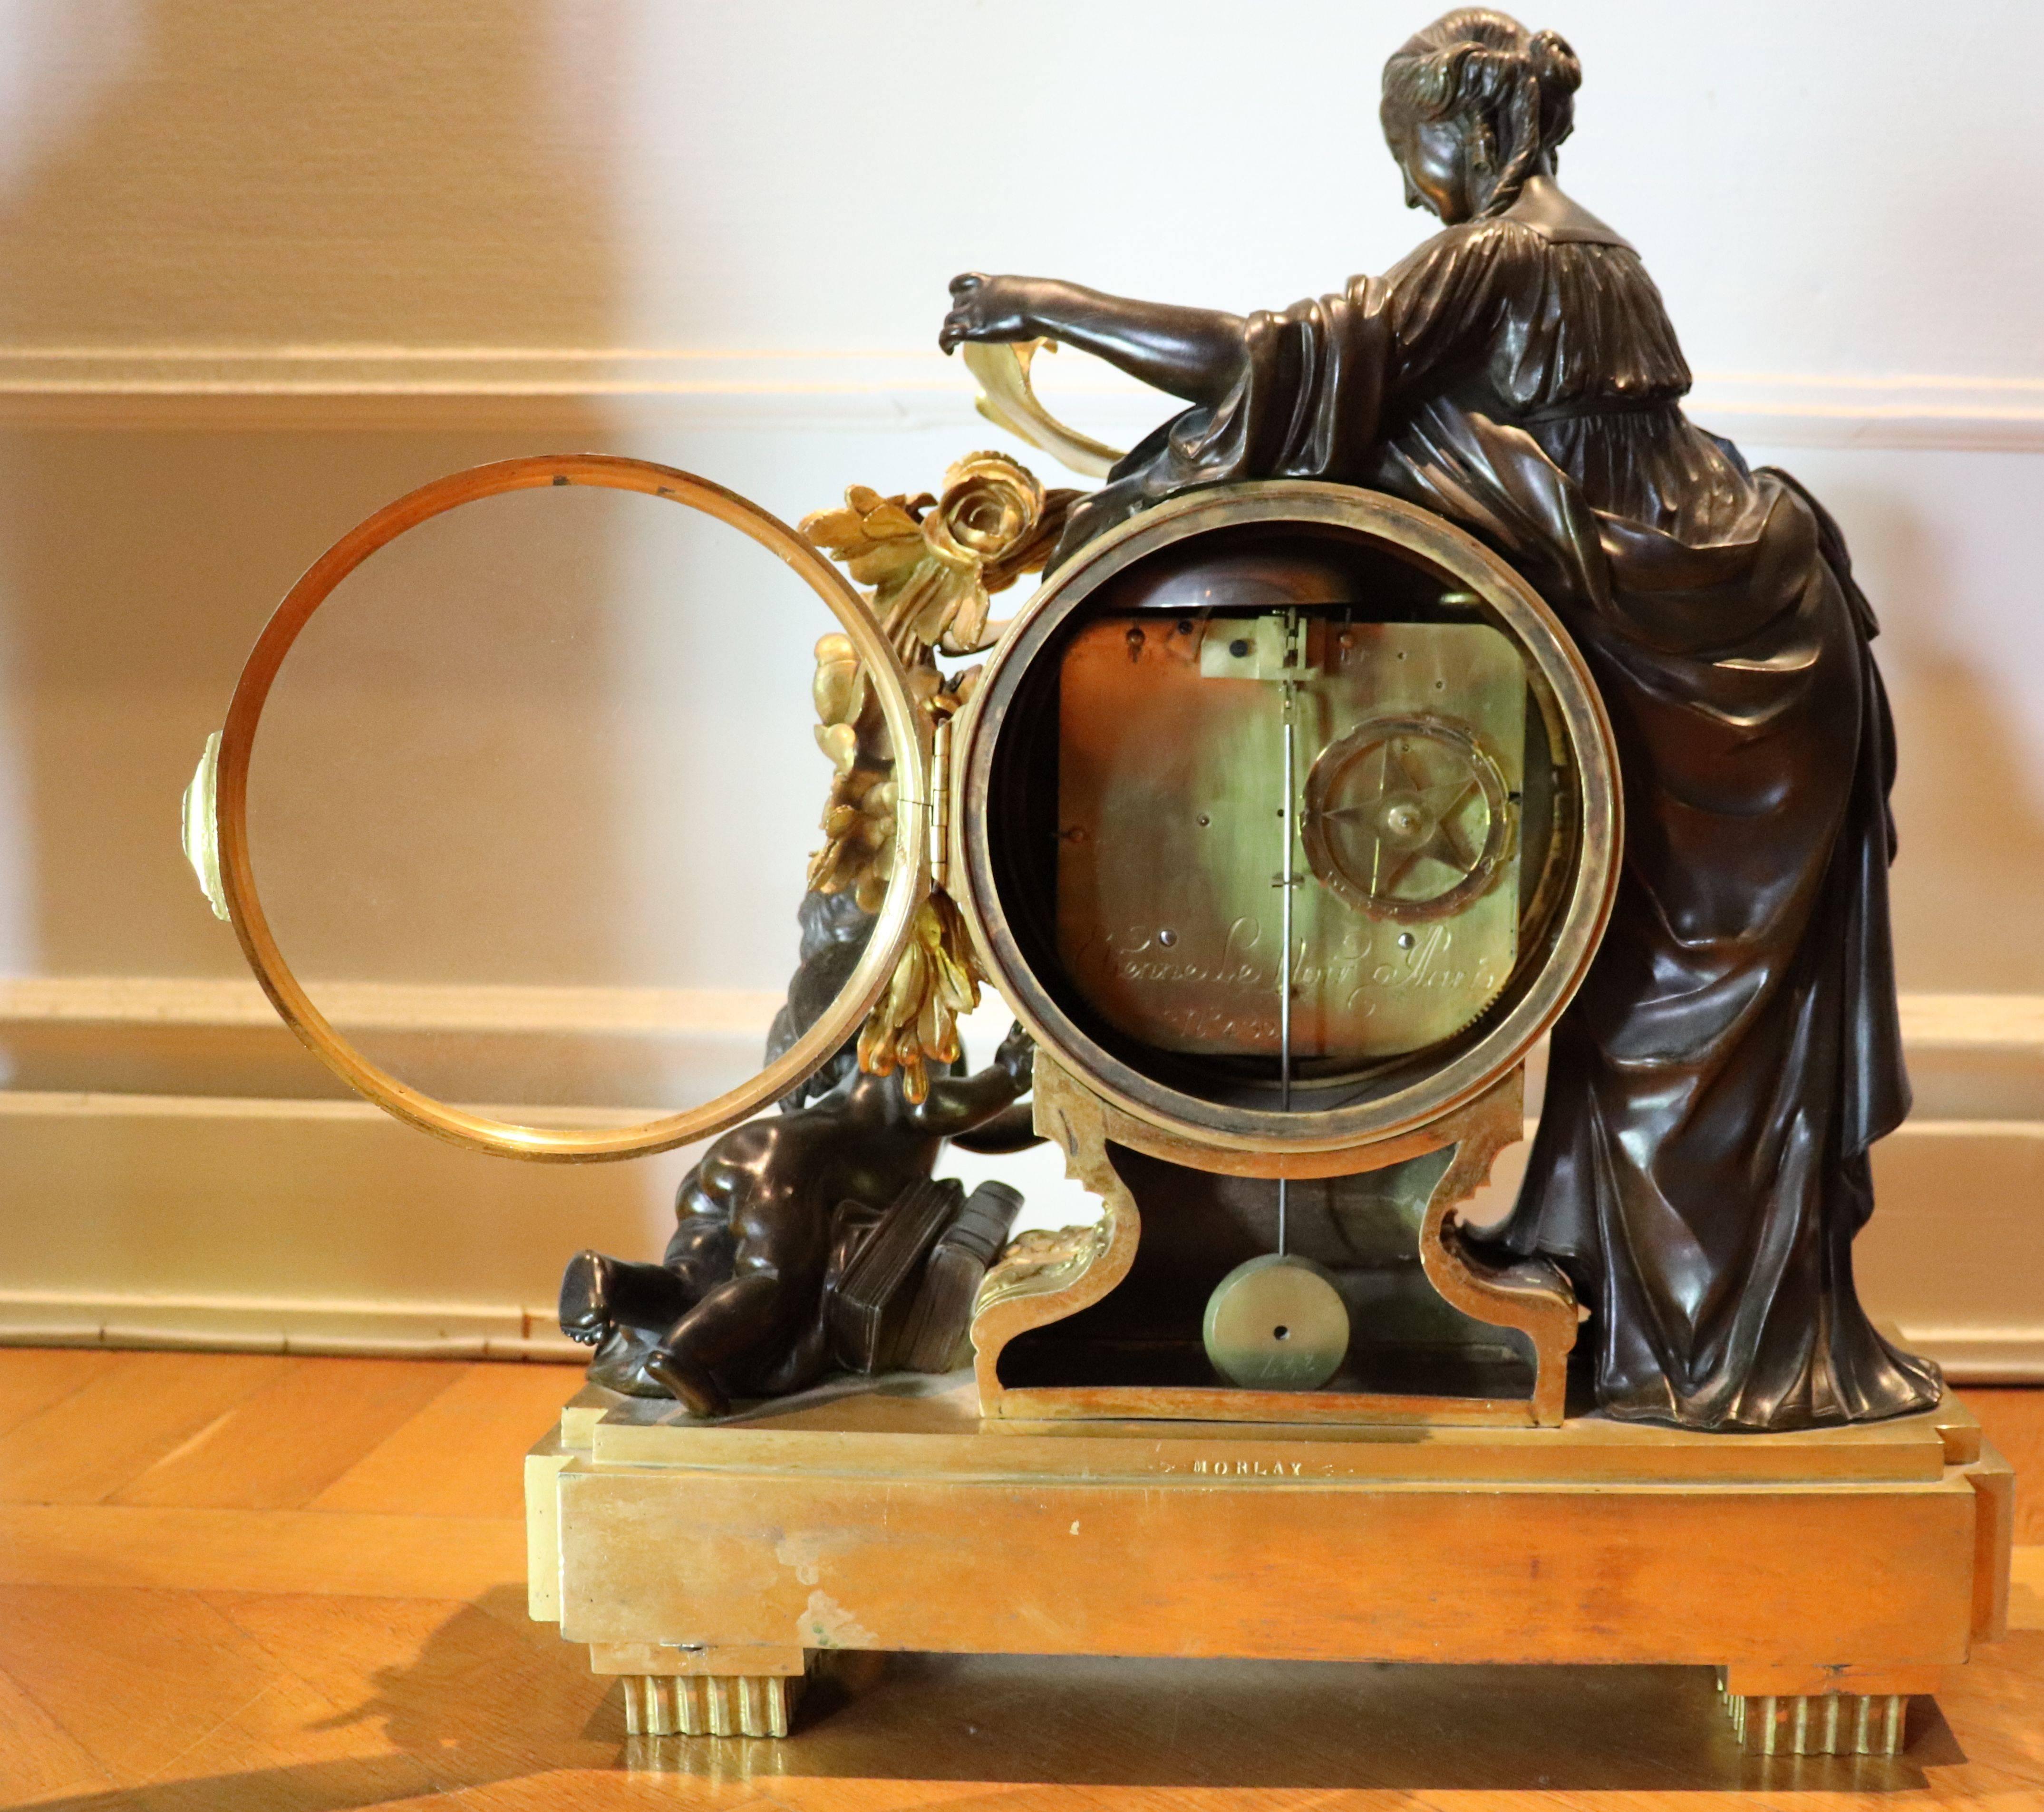 Louis XVI Gilt Bronze Mantle Clock Movement by Etienne Lenoir Case by Morley In Excellent Condition For Sale In Stockholm, SE